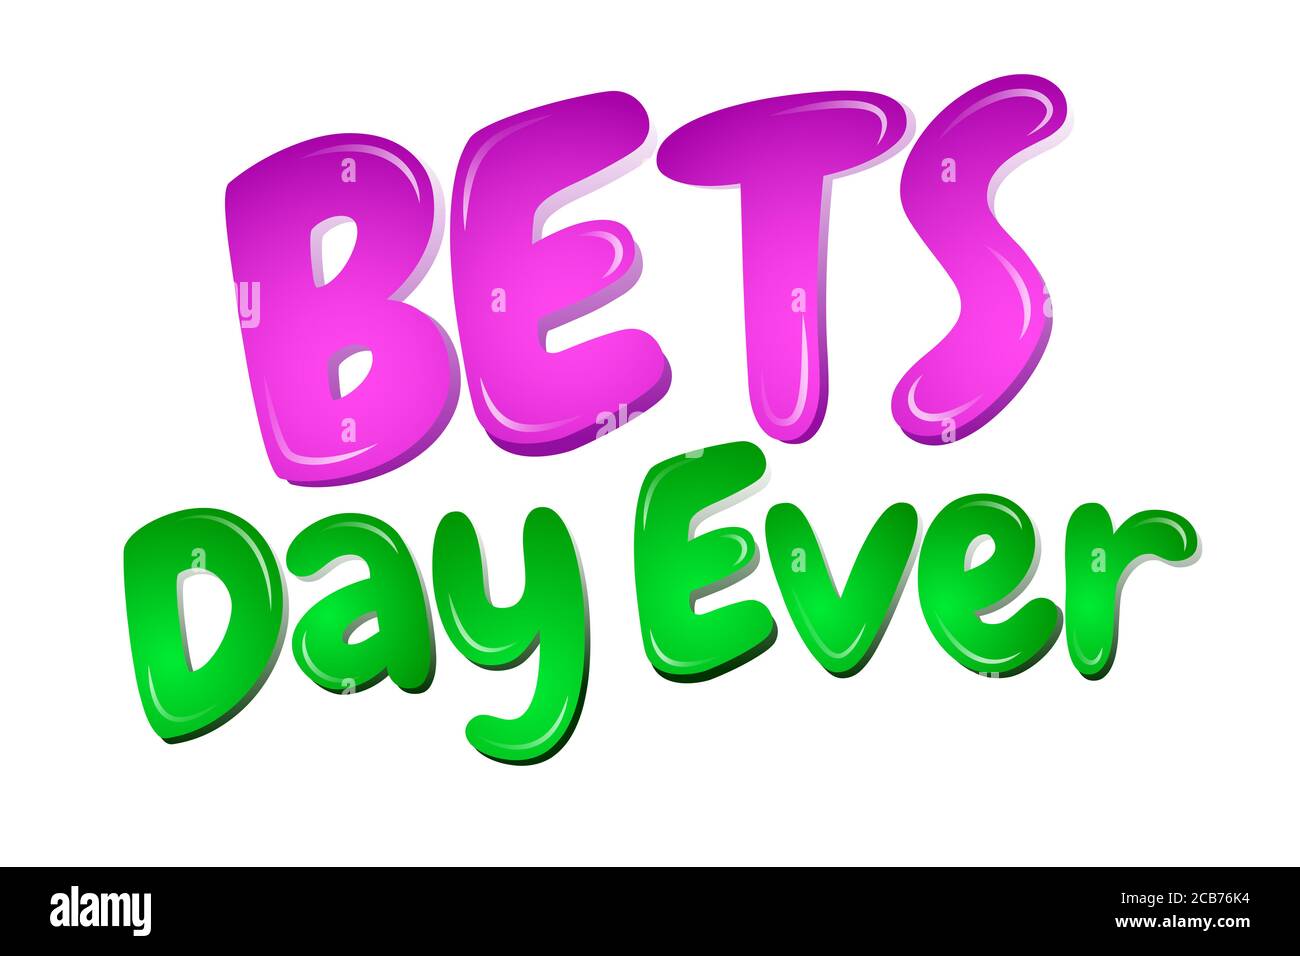 Best Day ever in cartoon colorful letters banner for kids Stock Photo